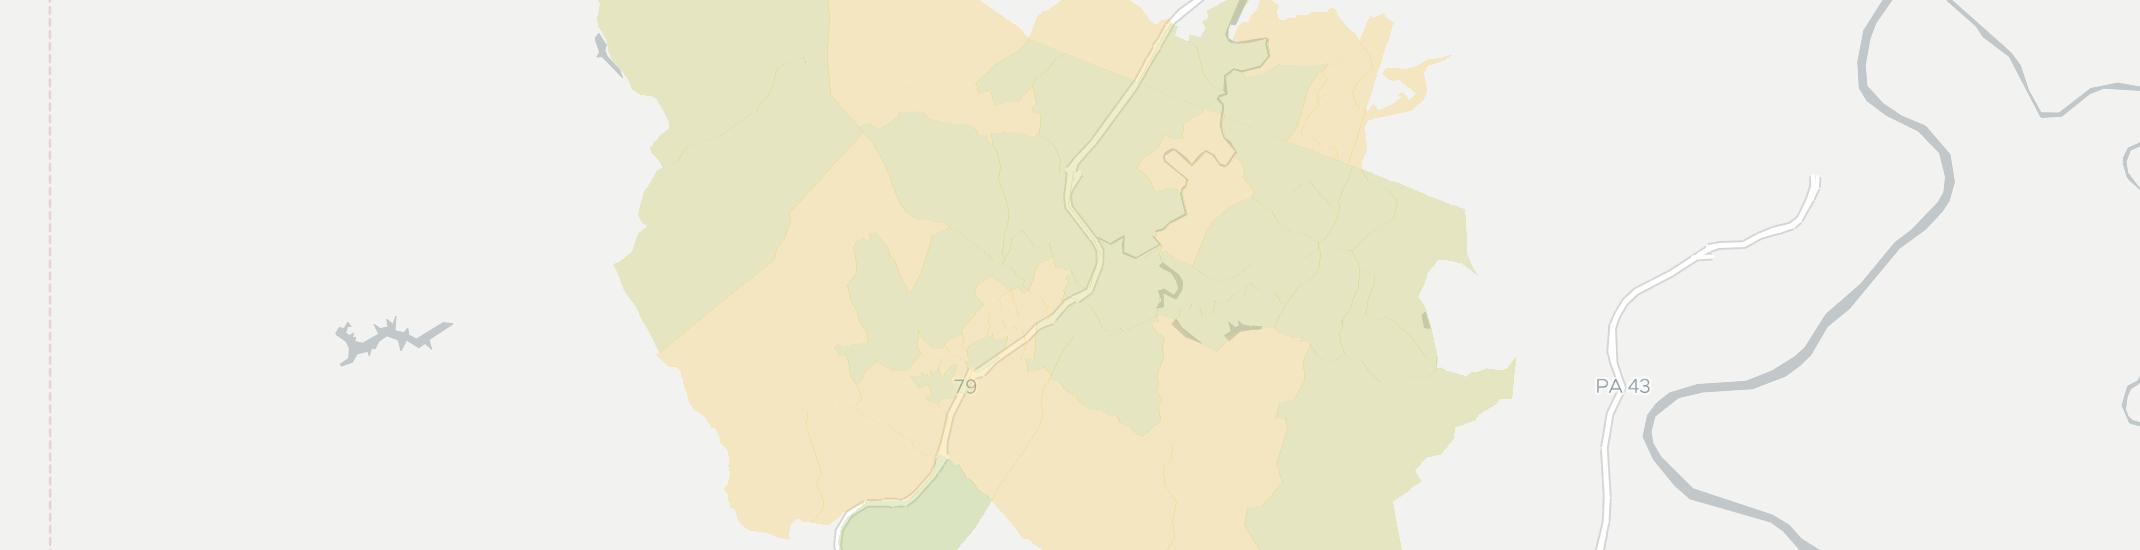 Canonsburg Internet Competition Map. Click for interactive map.